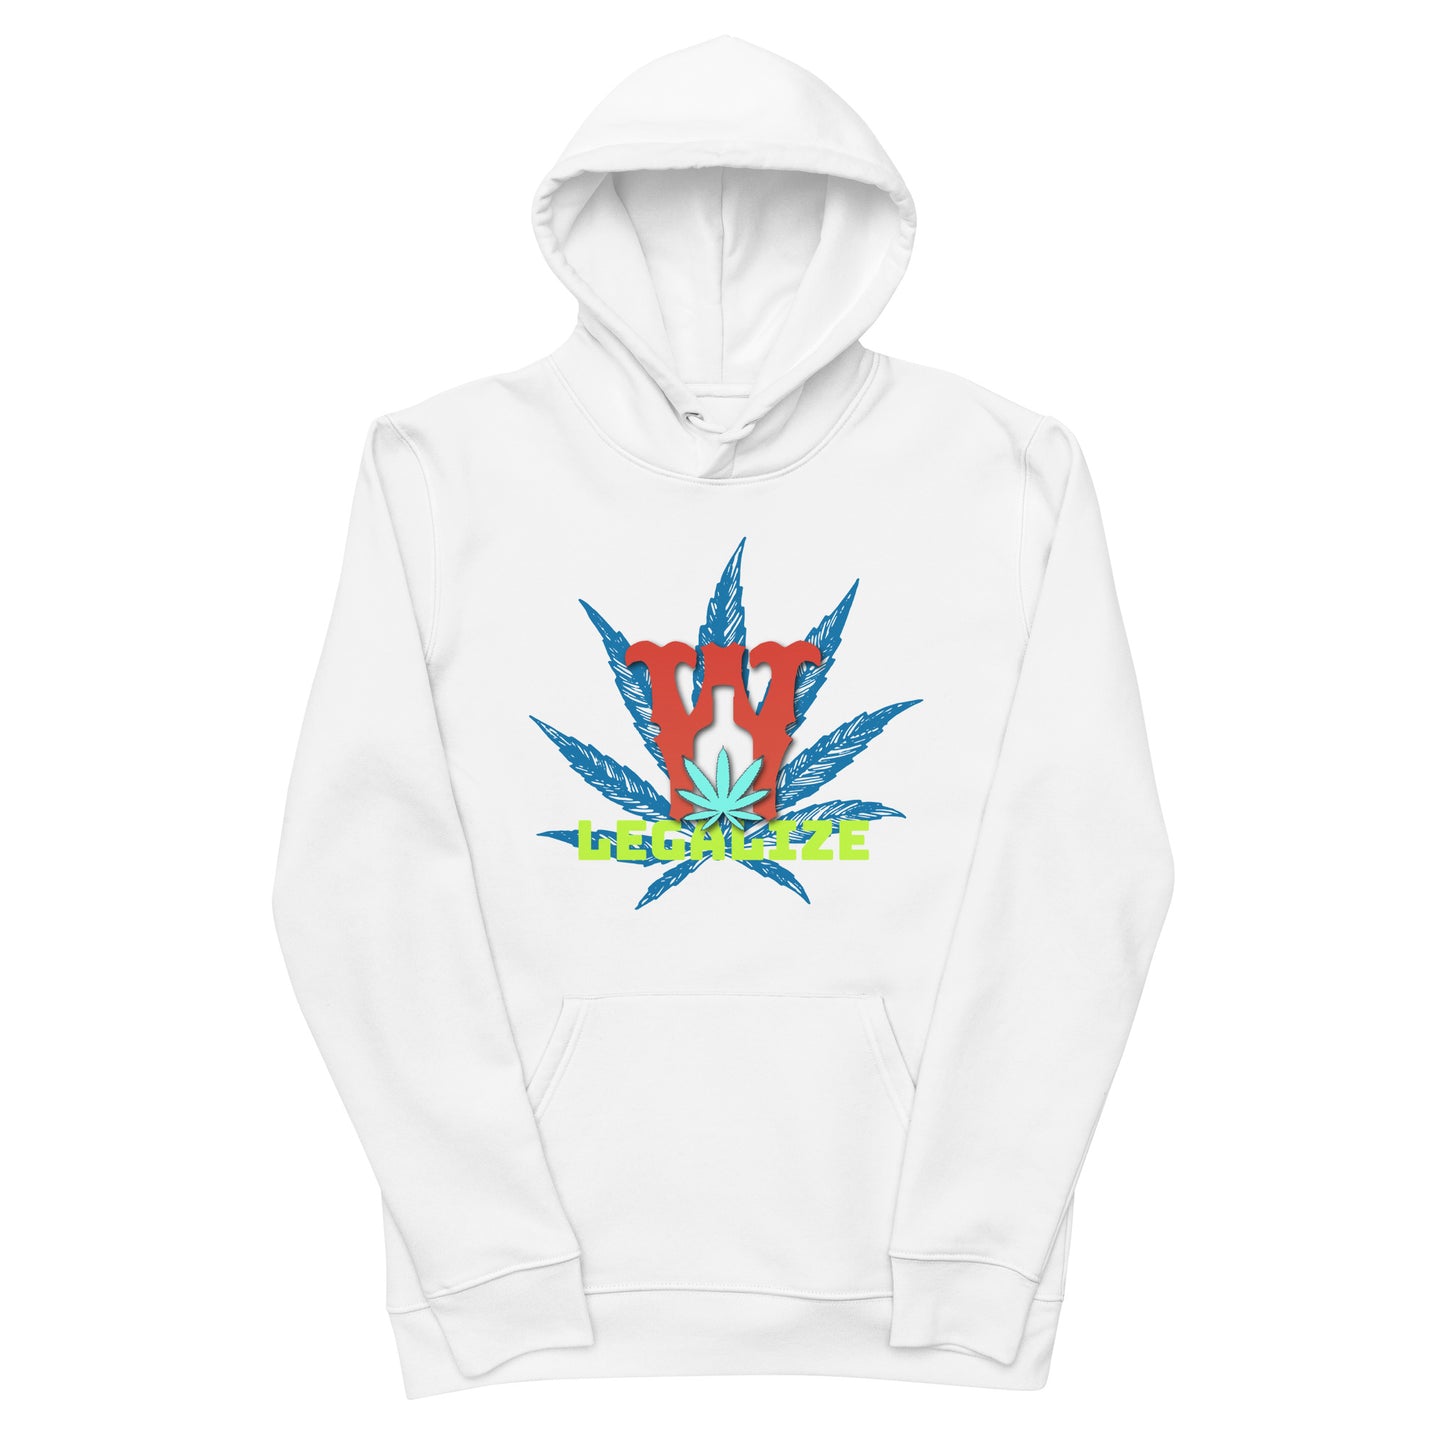 "Legalize" hoodie